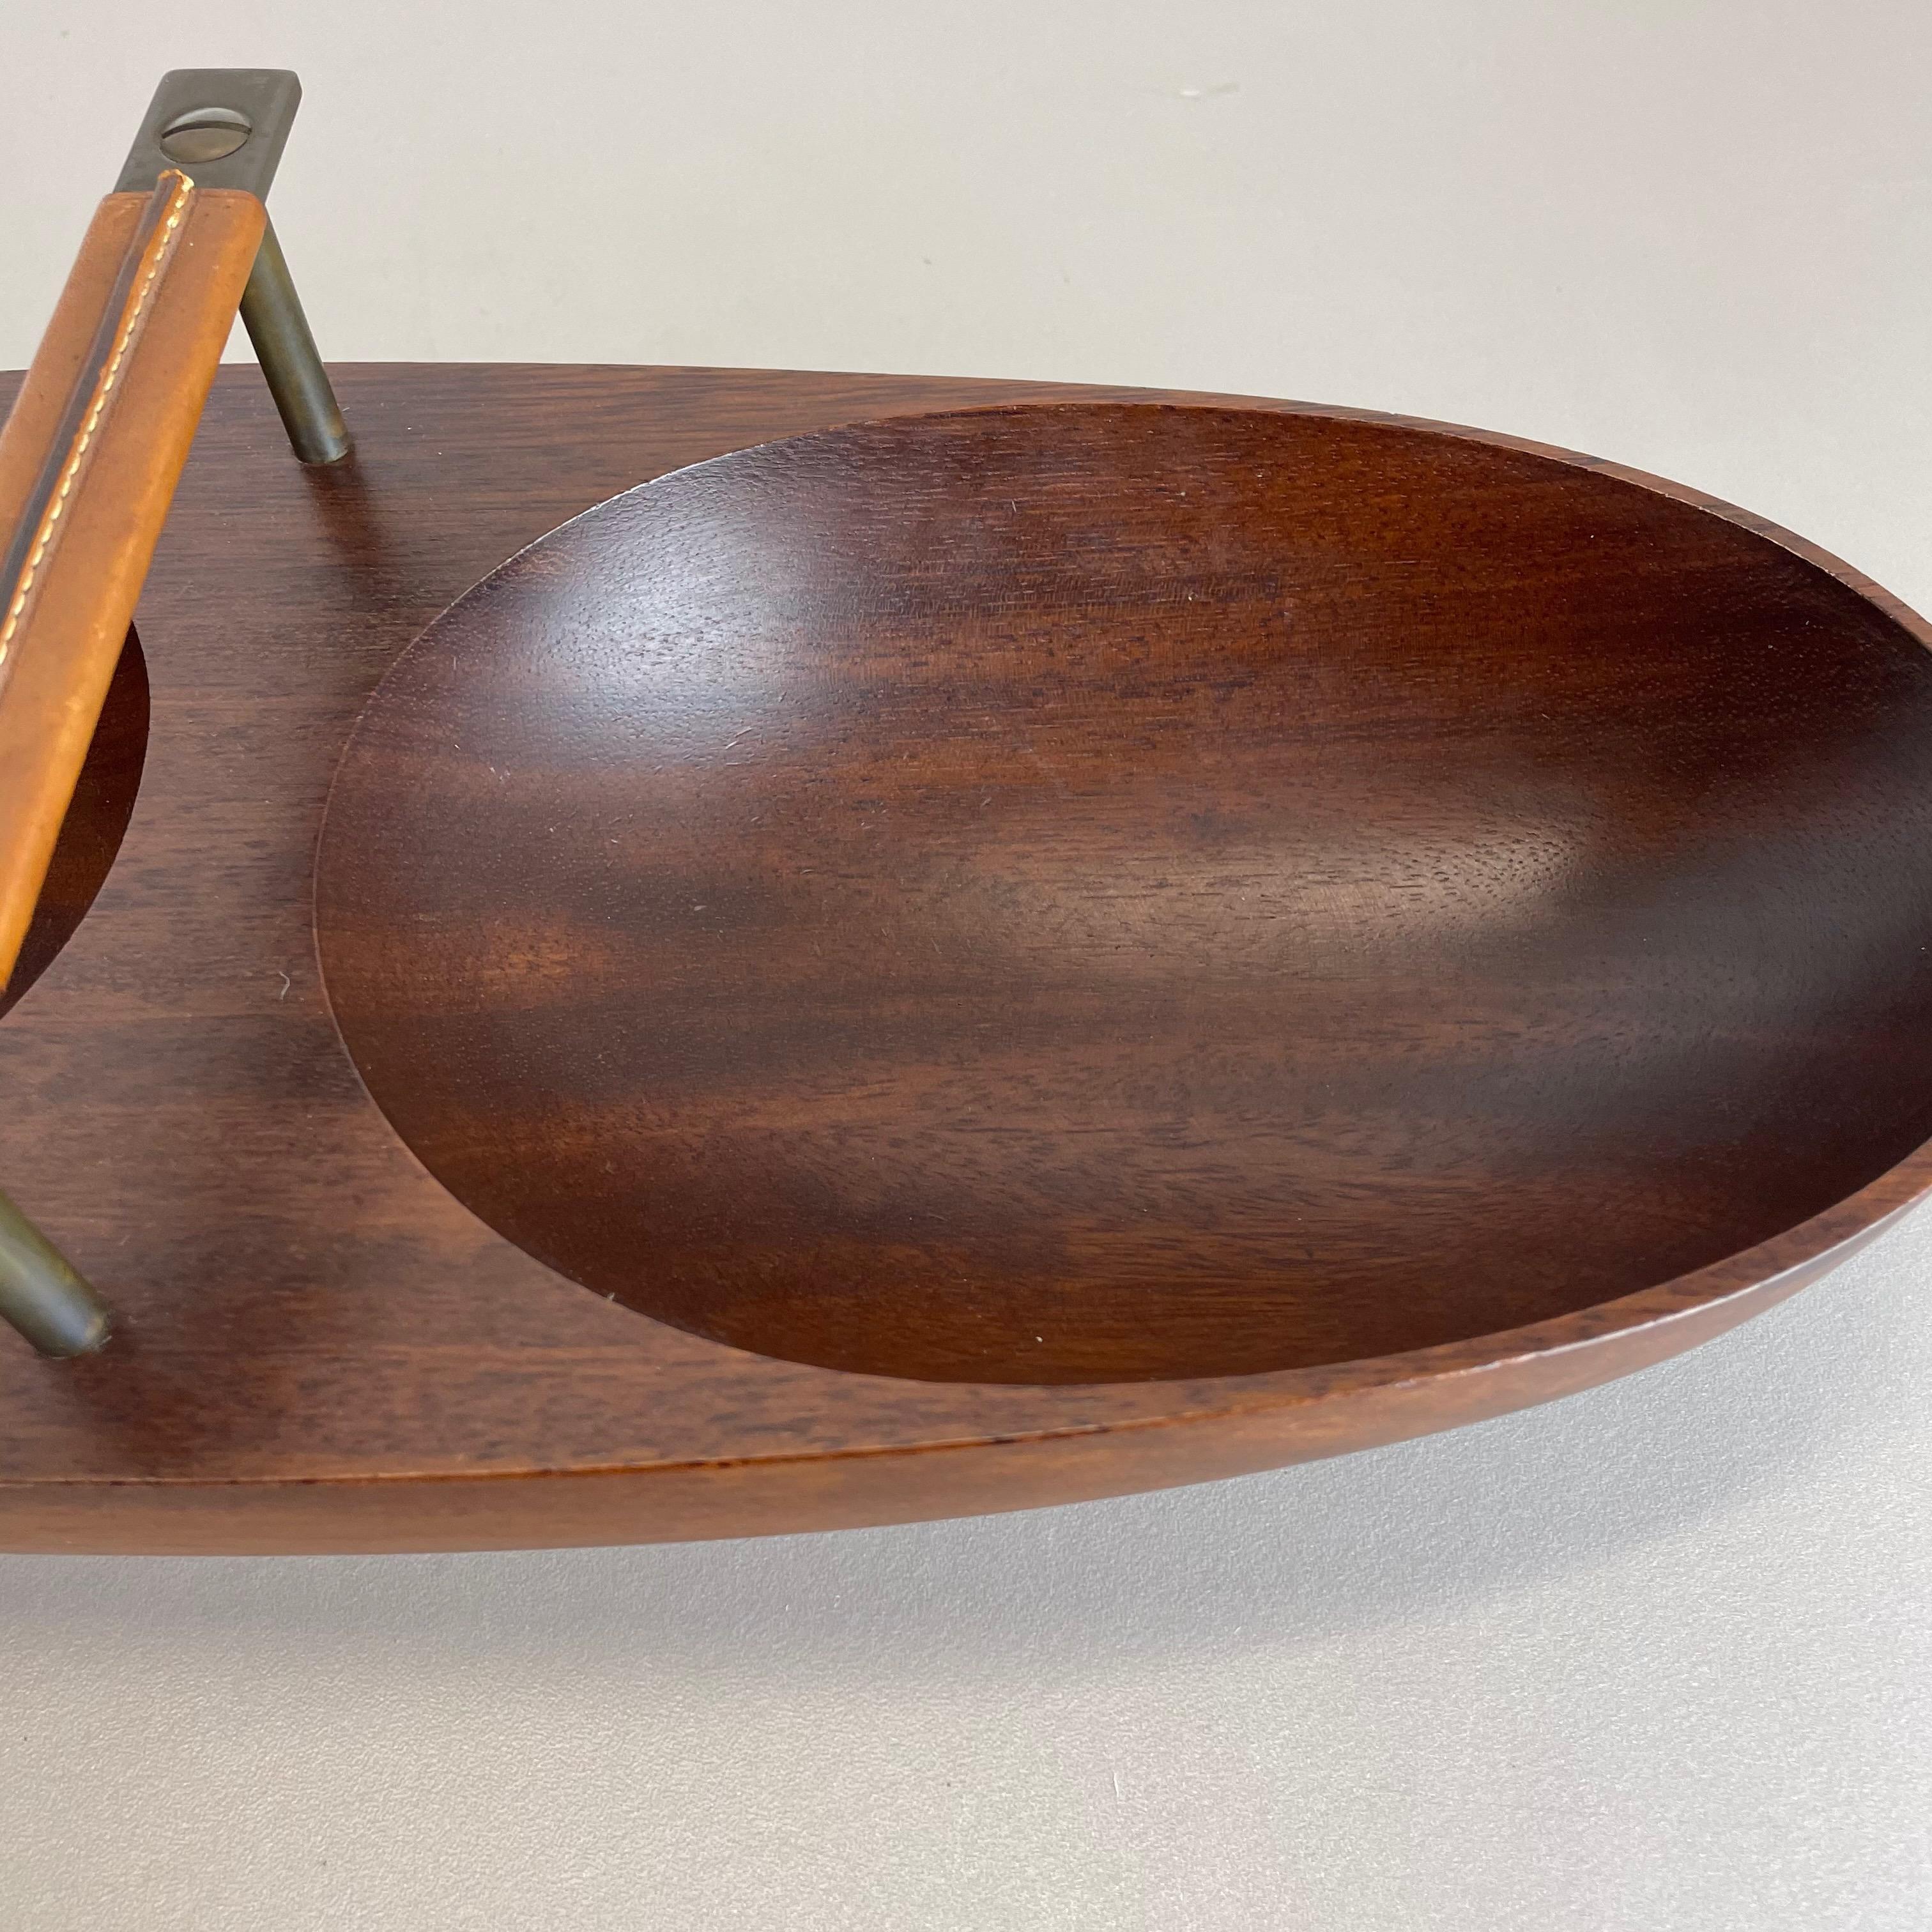 Large Teak Bowl with Brass and Leather Handle by Carl Auböck, Austria, 1950s For Sale 4